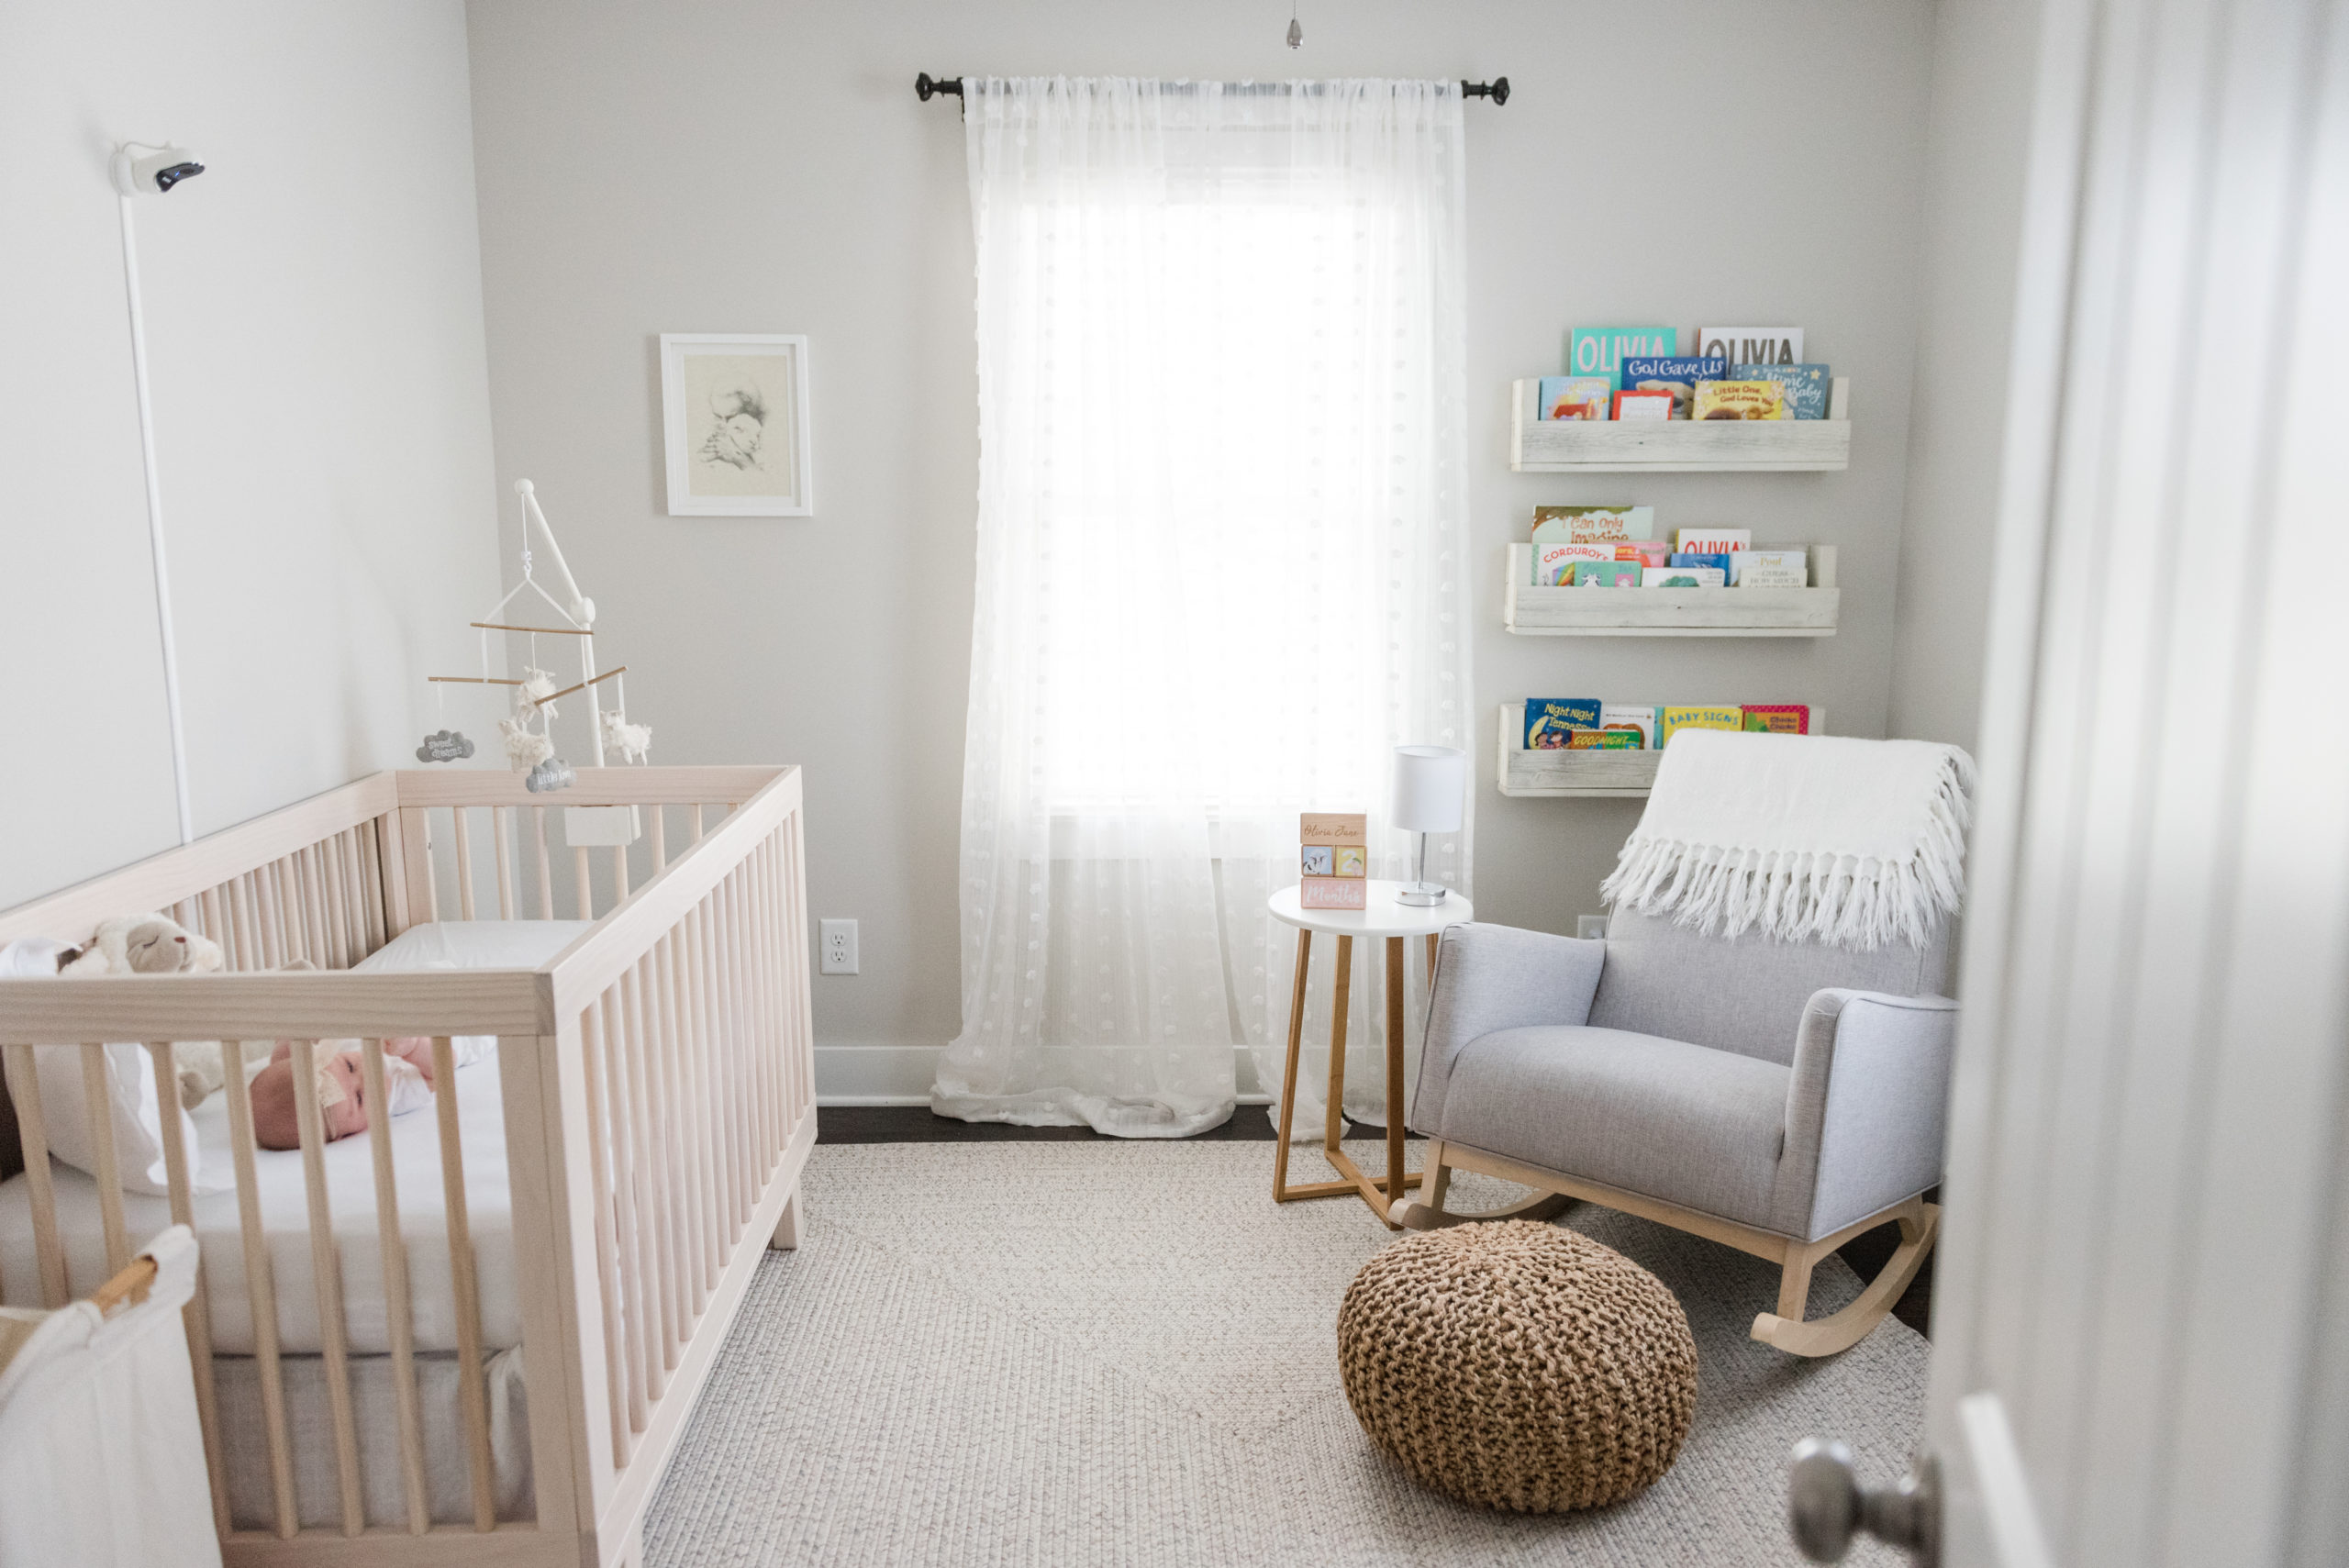 Olivia's Soft Gray and Neutral Lamb Baby Nursery - Sweet Williams Photography is a lifestyle, engagement and wedding photographer serving the Nashville, Tennessee area.